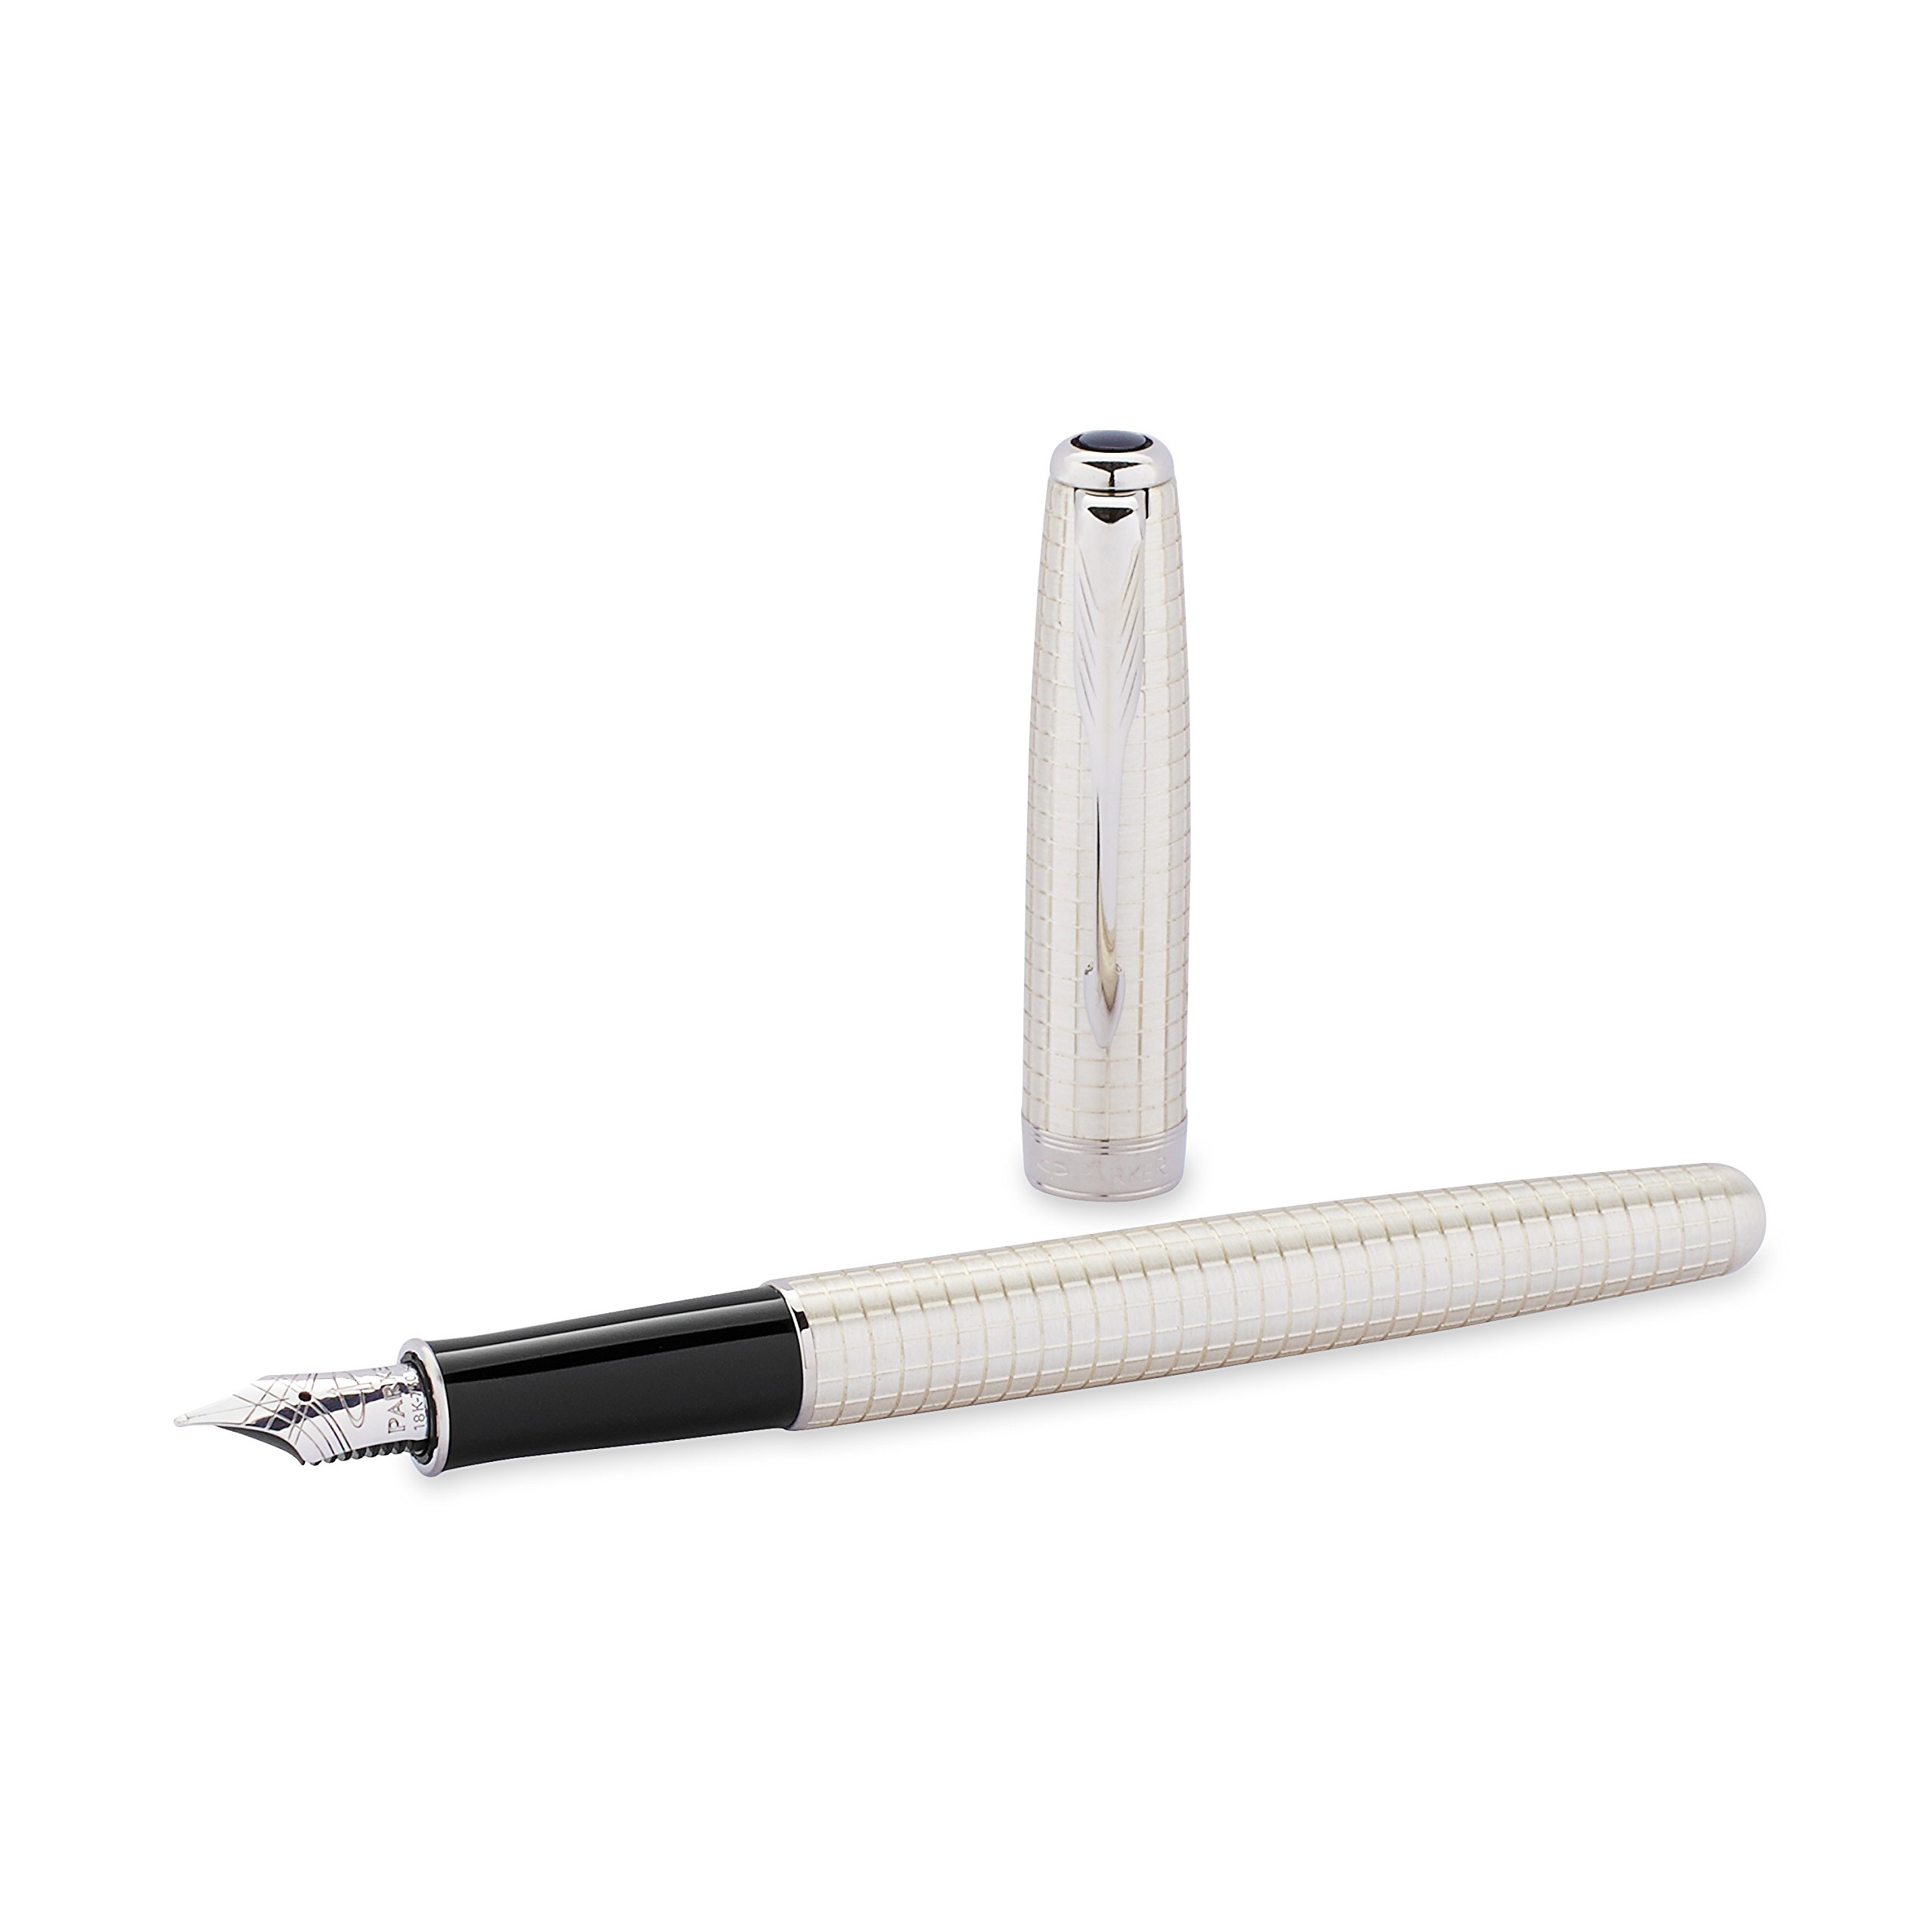 Parker Sonnet Cisele Silver with Palladium-plated Trim, Fountain Pen, Medium solid gold nib with Black ink (S0912500)